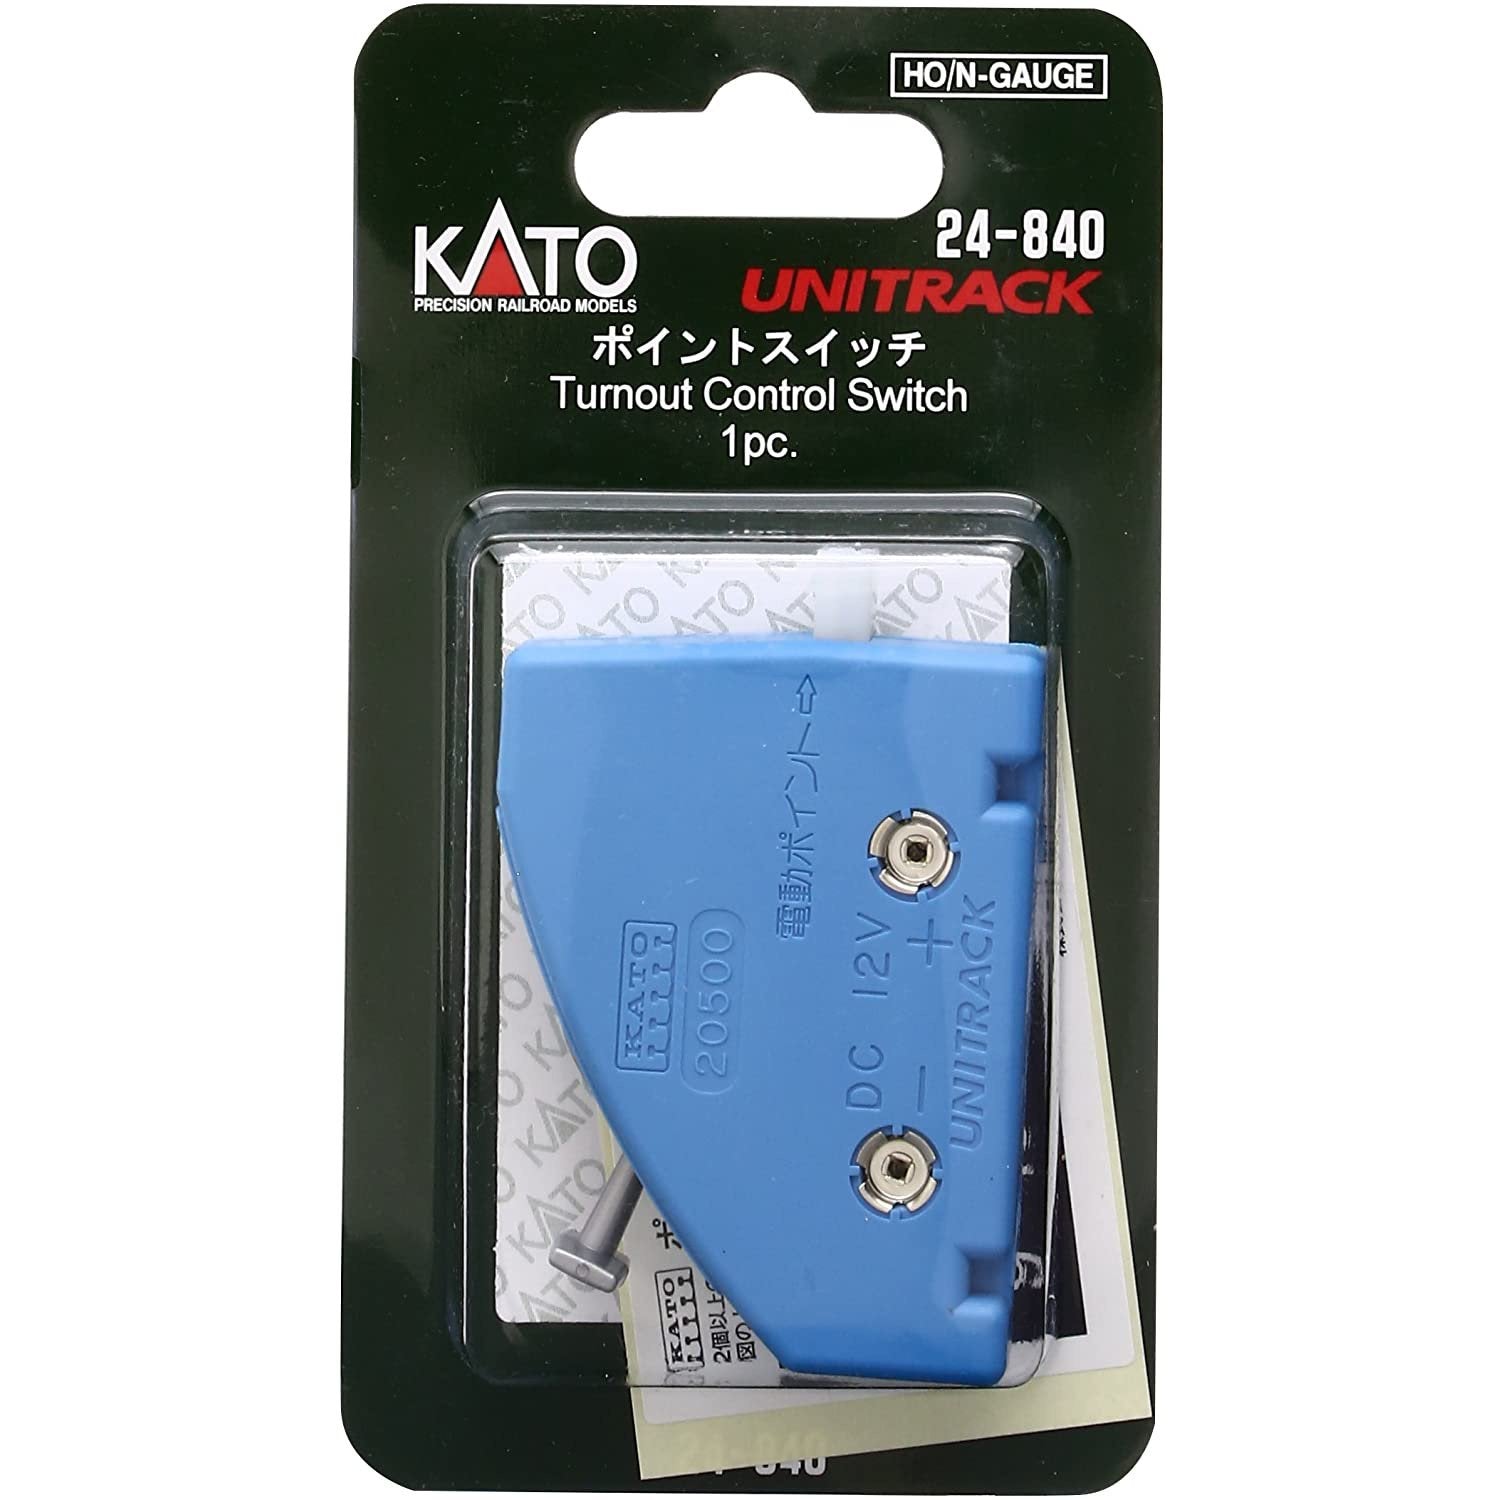 Kato UniTrack Turnout Control Switch for Ho & N Scale